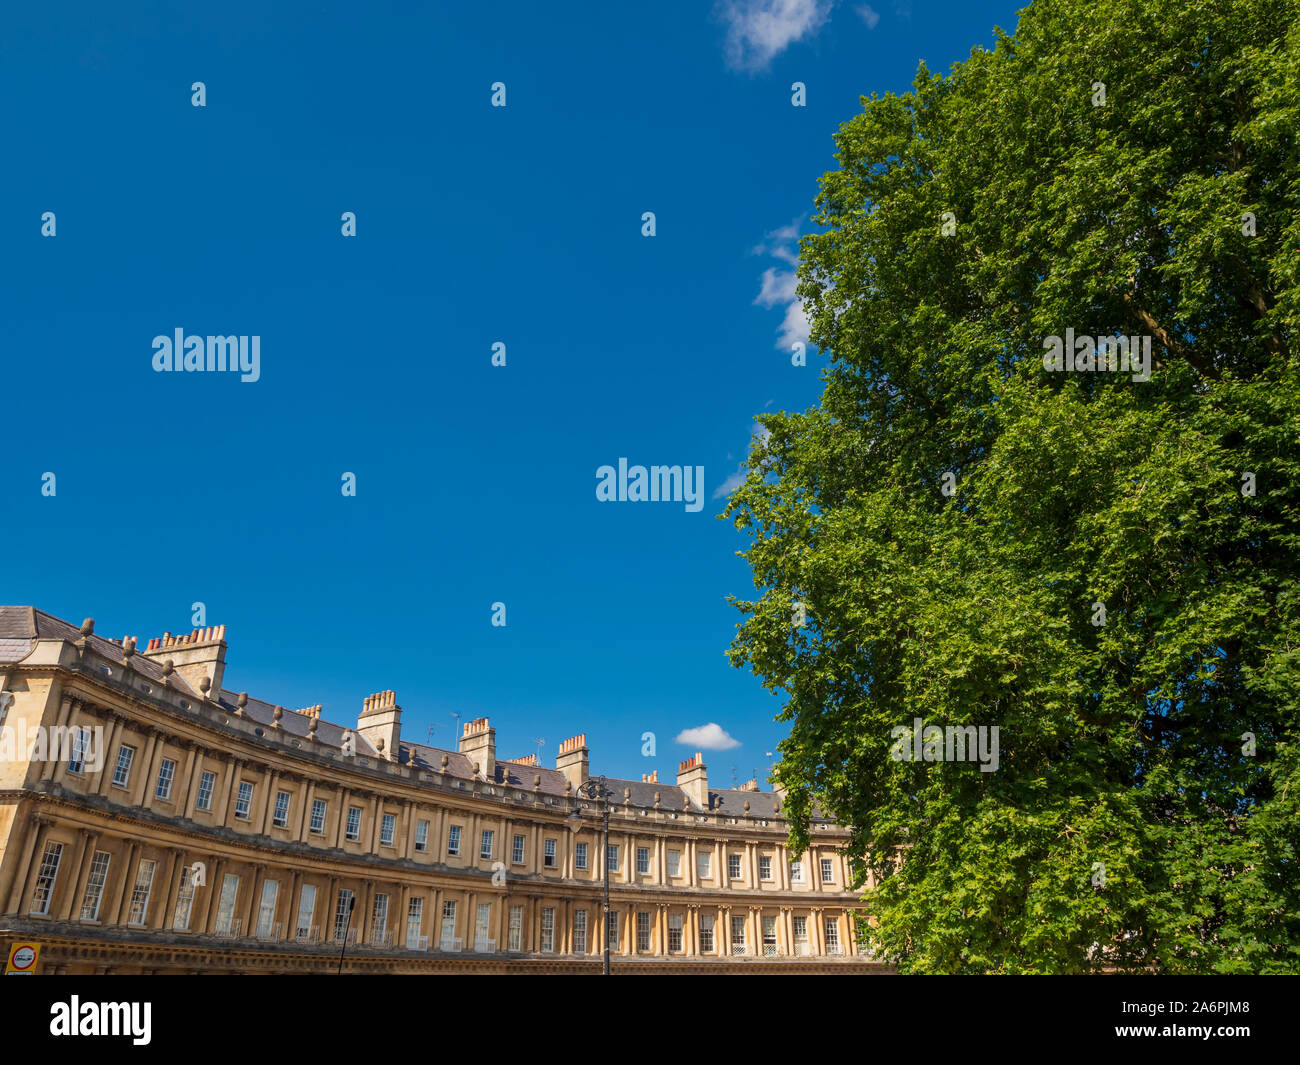 The Circus is a historic street of large townhouses in the city of Bath, forming a circle with three entrances. Designed by the architect John Wood. Stock Photo